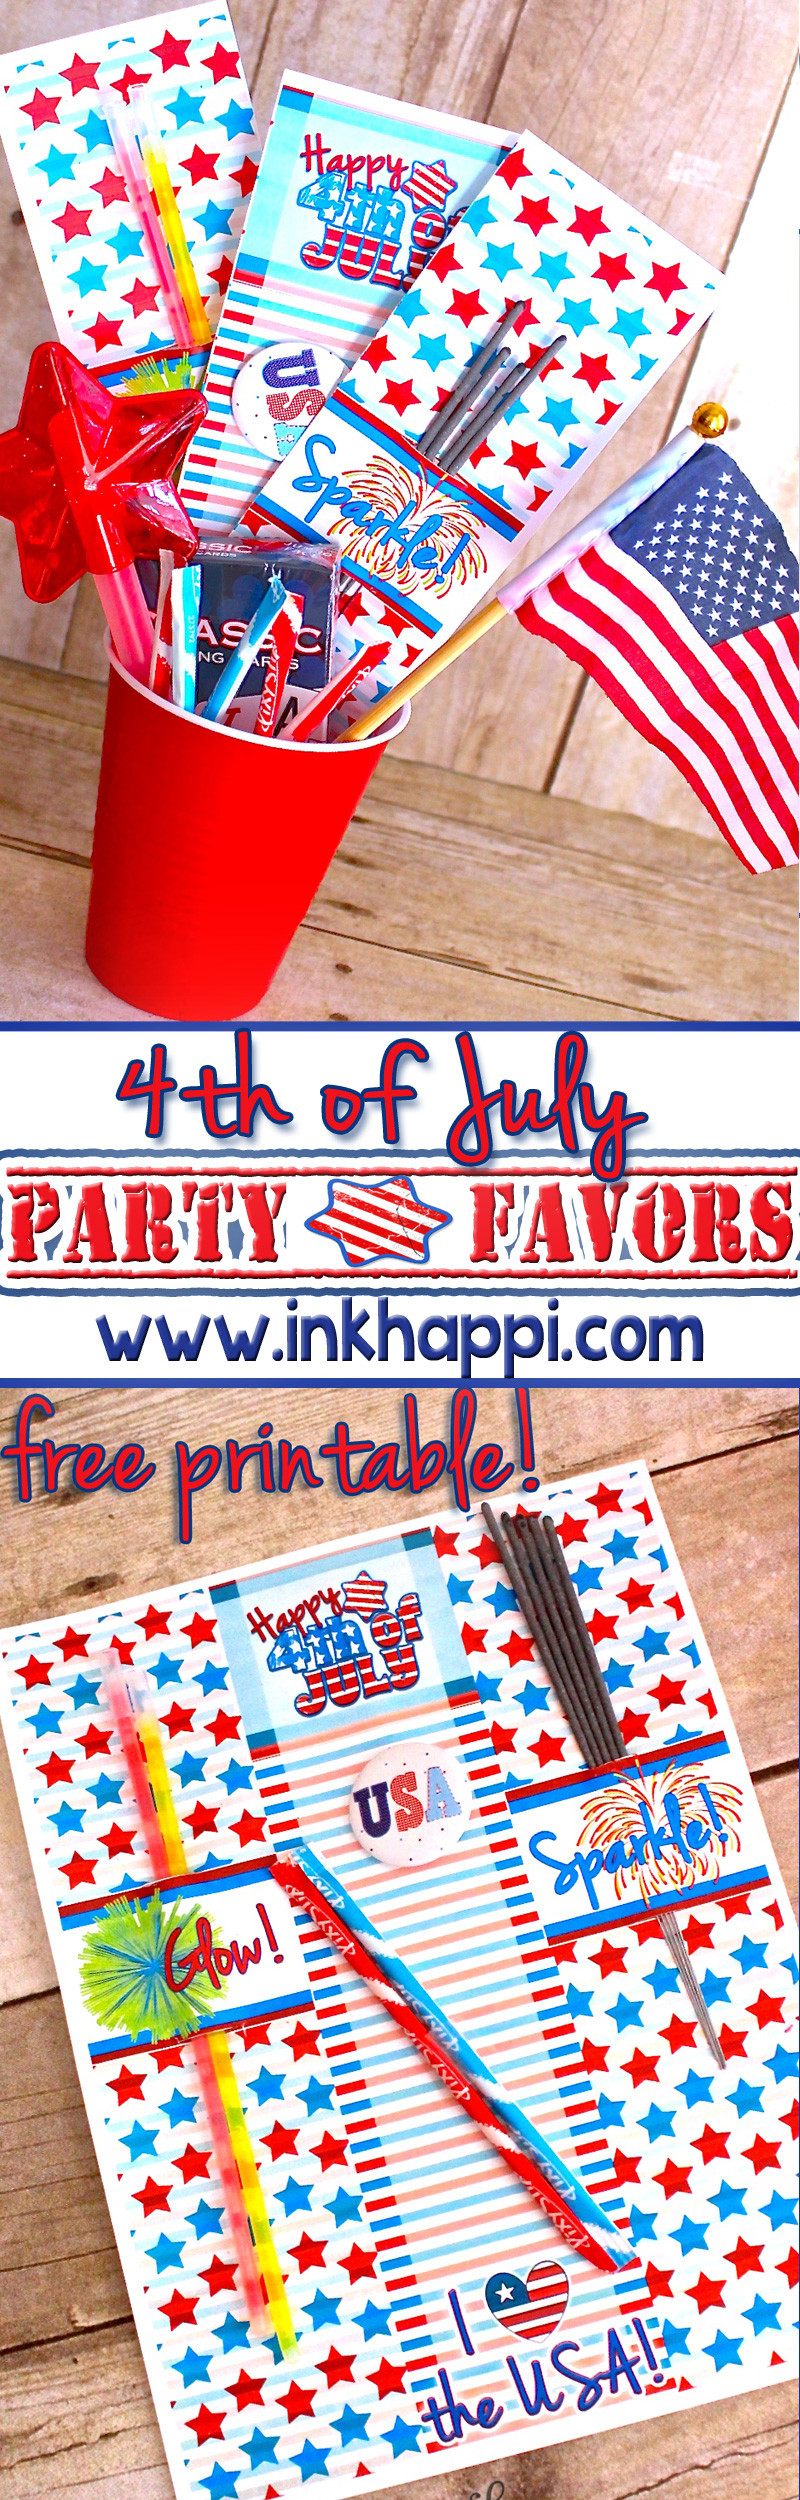 4th Of July Party
 4th of July Party favors Cheap and easy DIY inkhappi